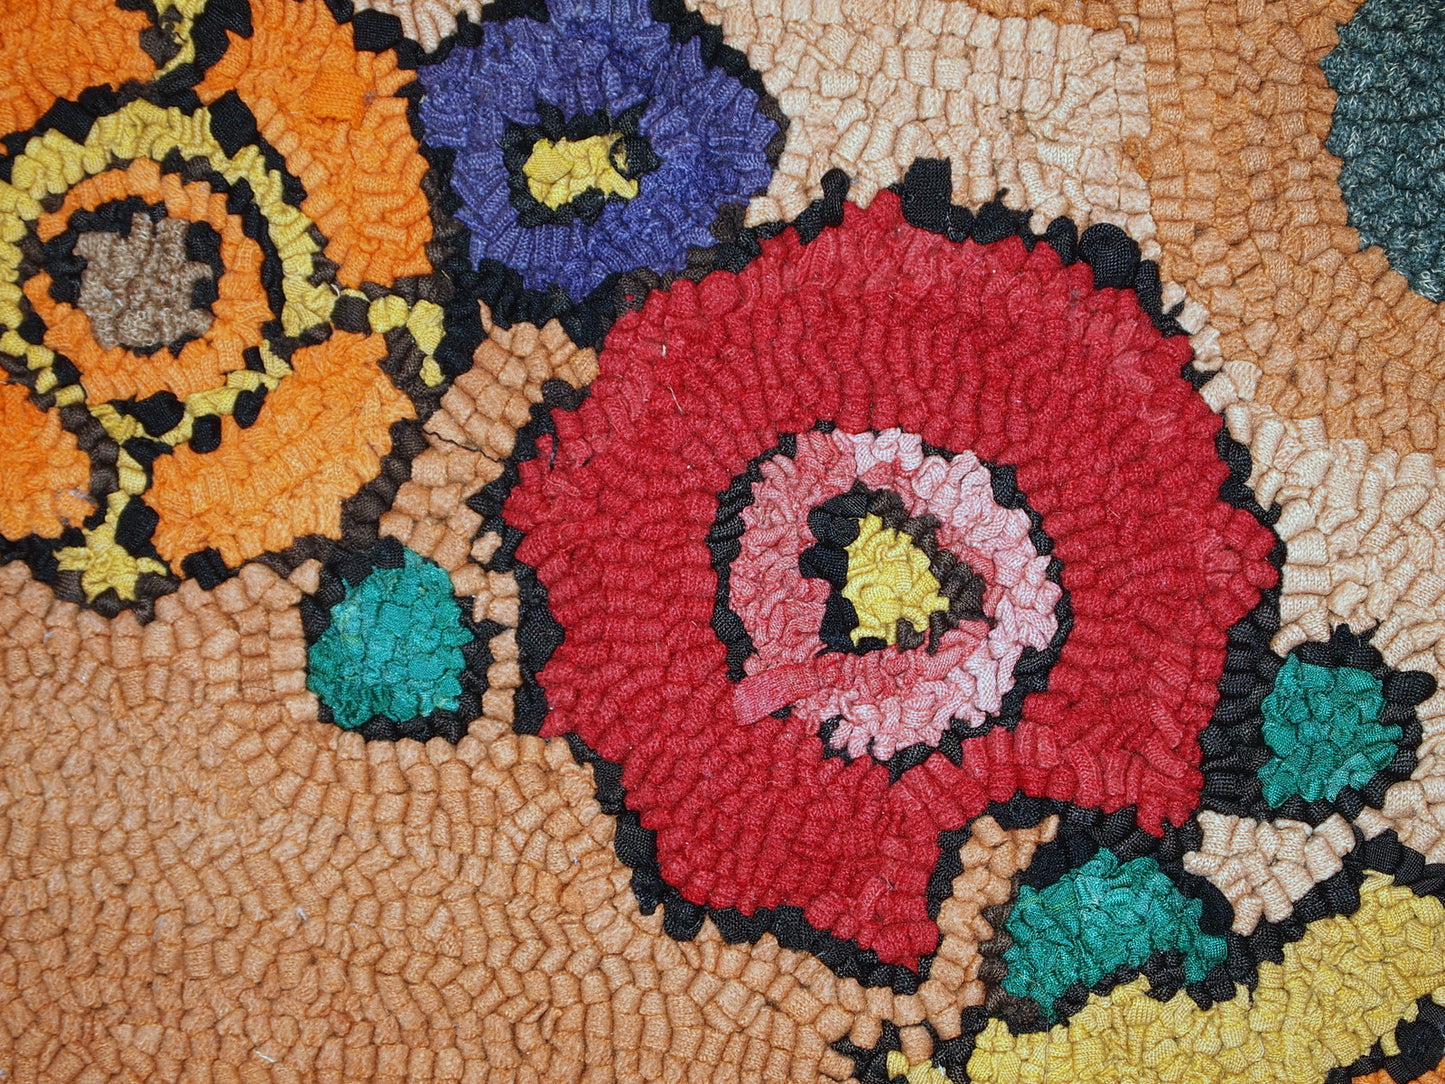 Rug backside detail showing the handcrafted quality of the American hooked rug